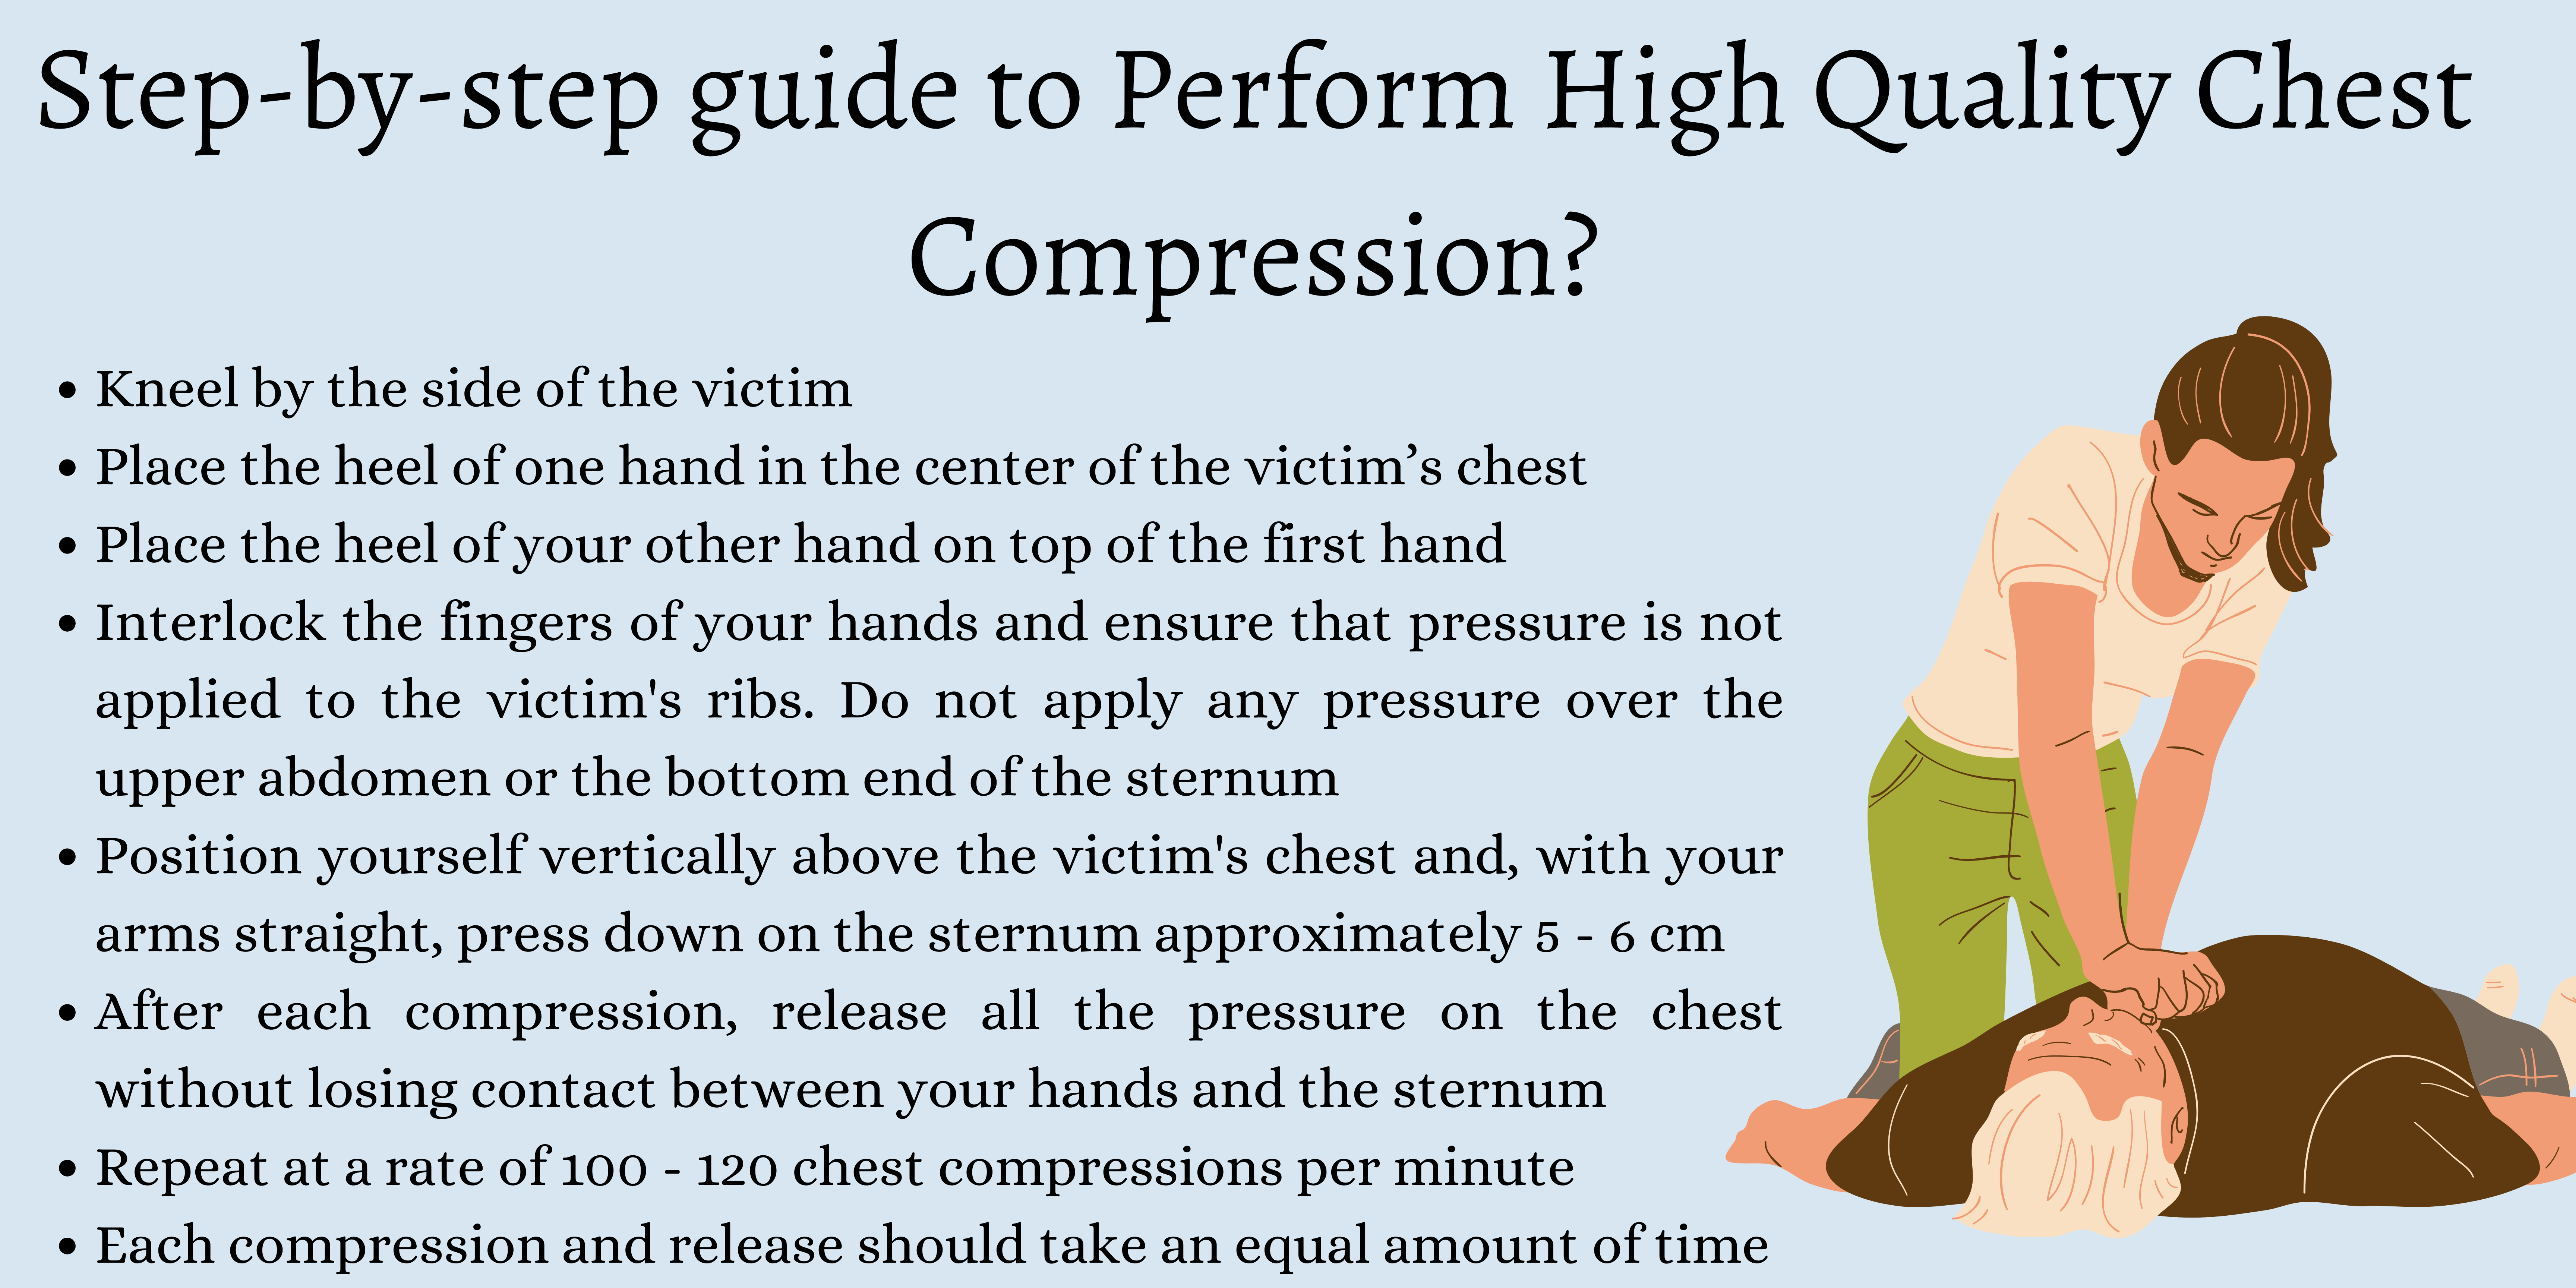 Proper Hand Placement for Effective Chest Compressions